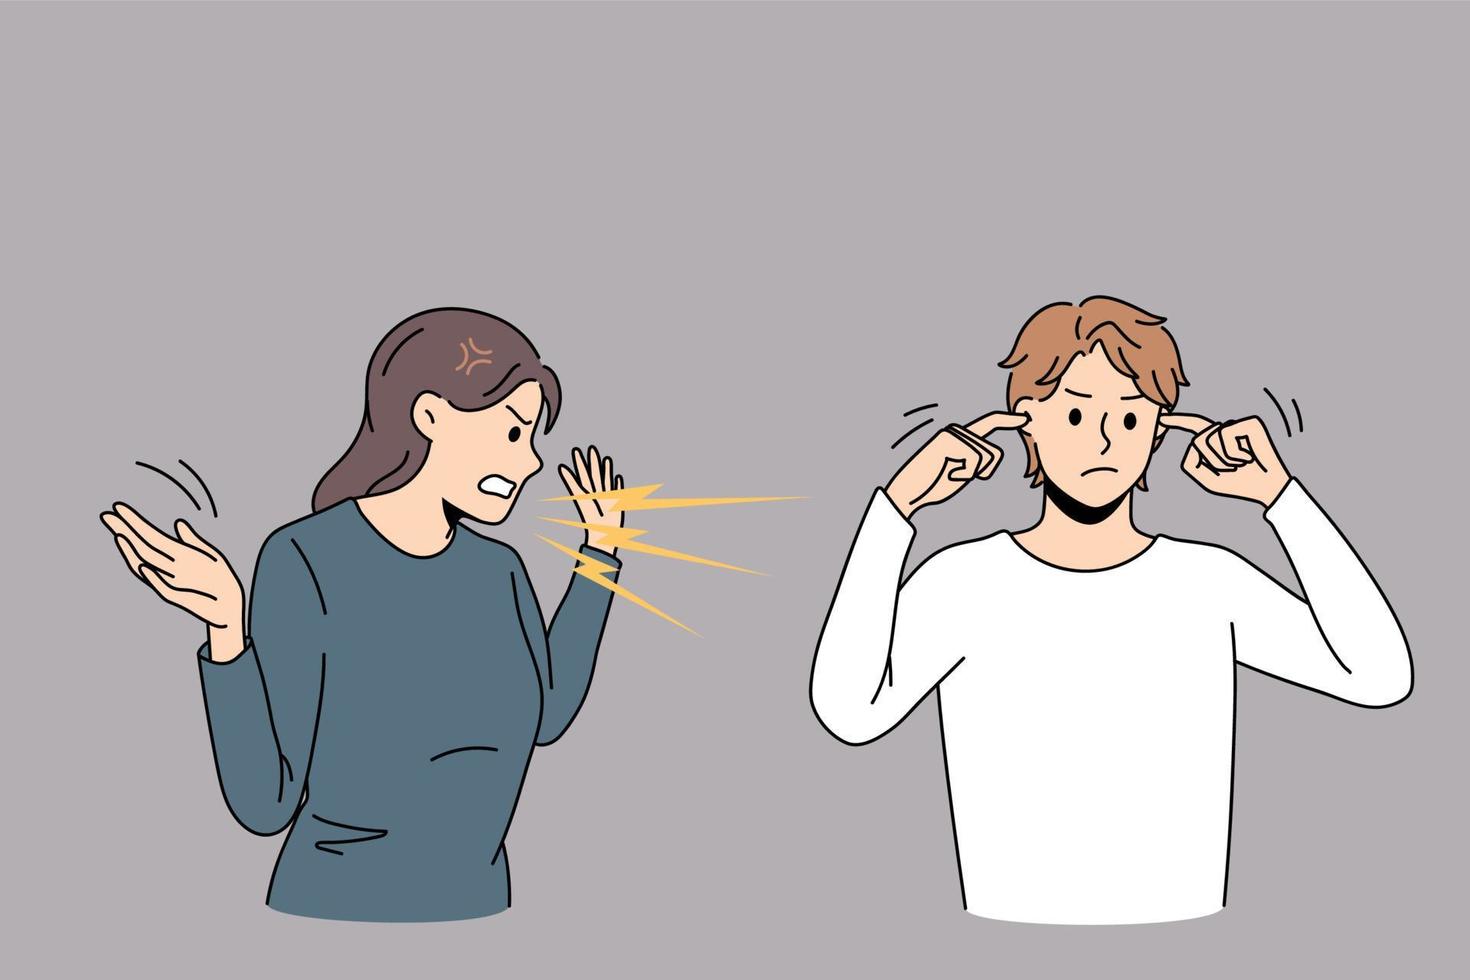 Angry woman scream yell at ignorant husband closing ears not to hear. Mad furious wife shout at man avoid ignore fight or quarrel. Family misunderstanding, breakup, divorce. Vector illustration.